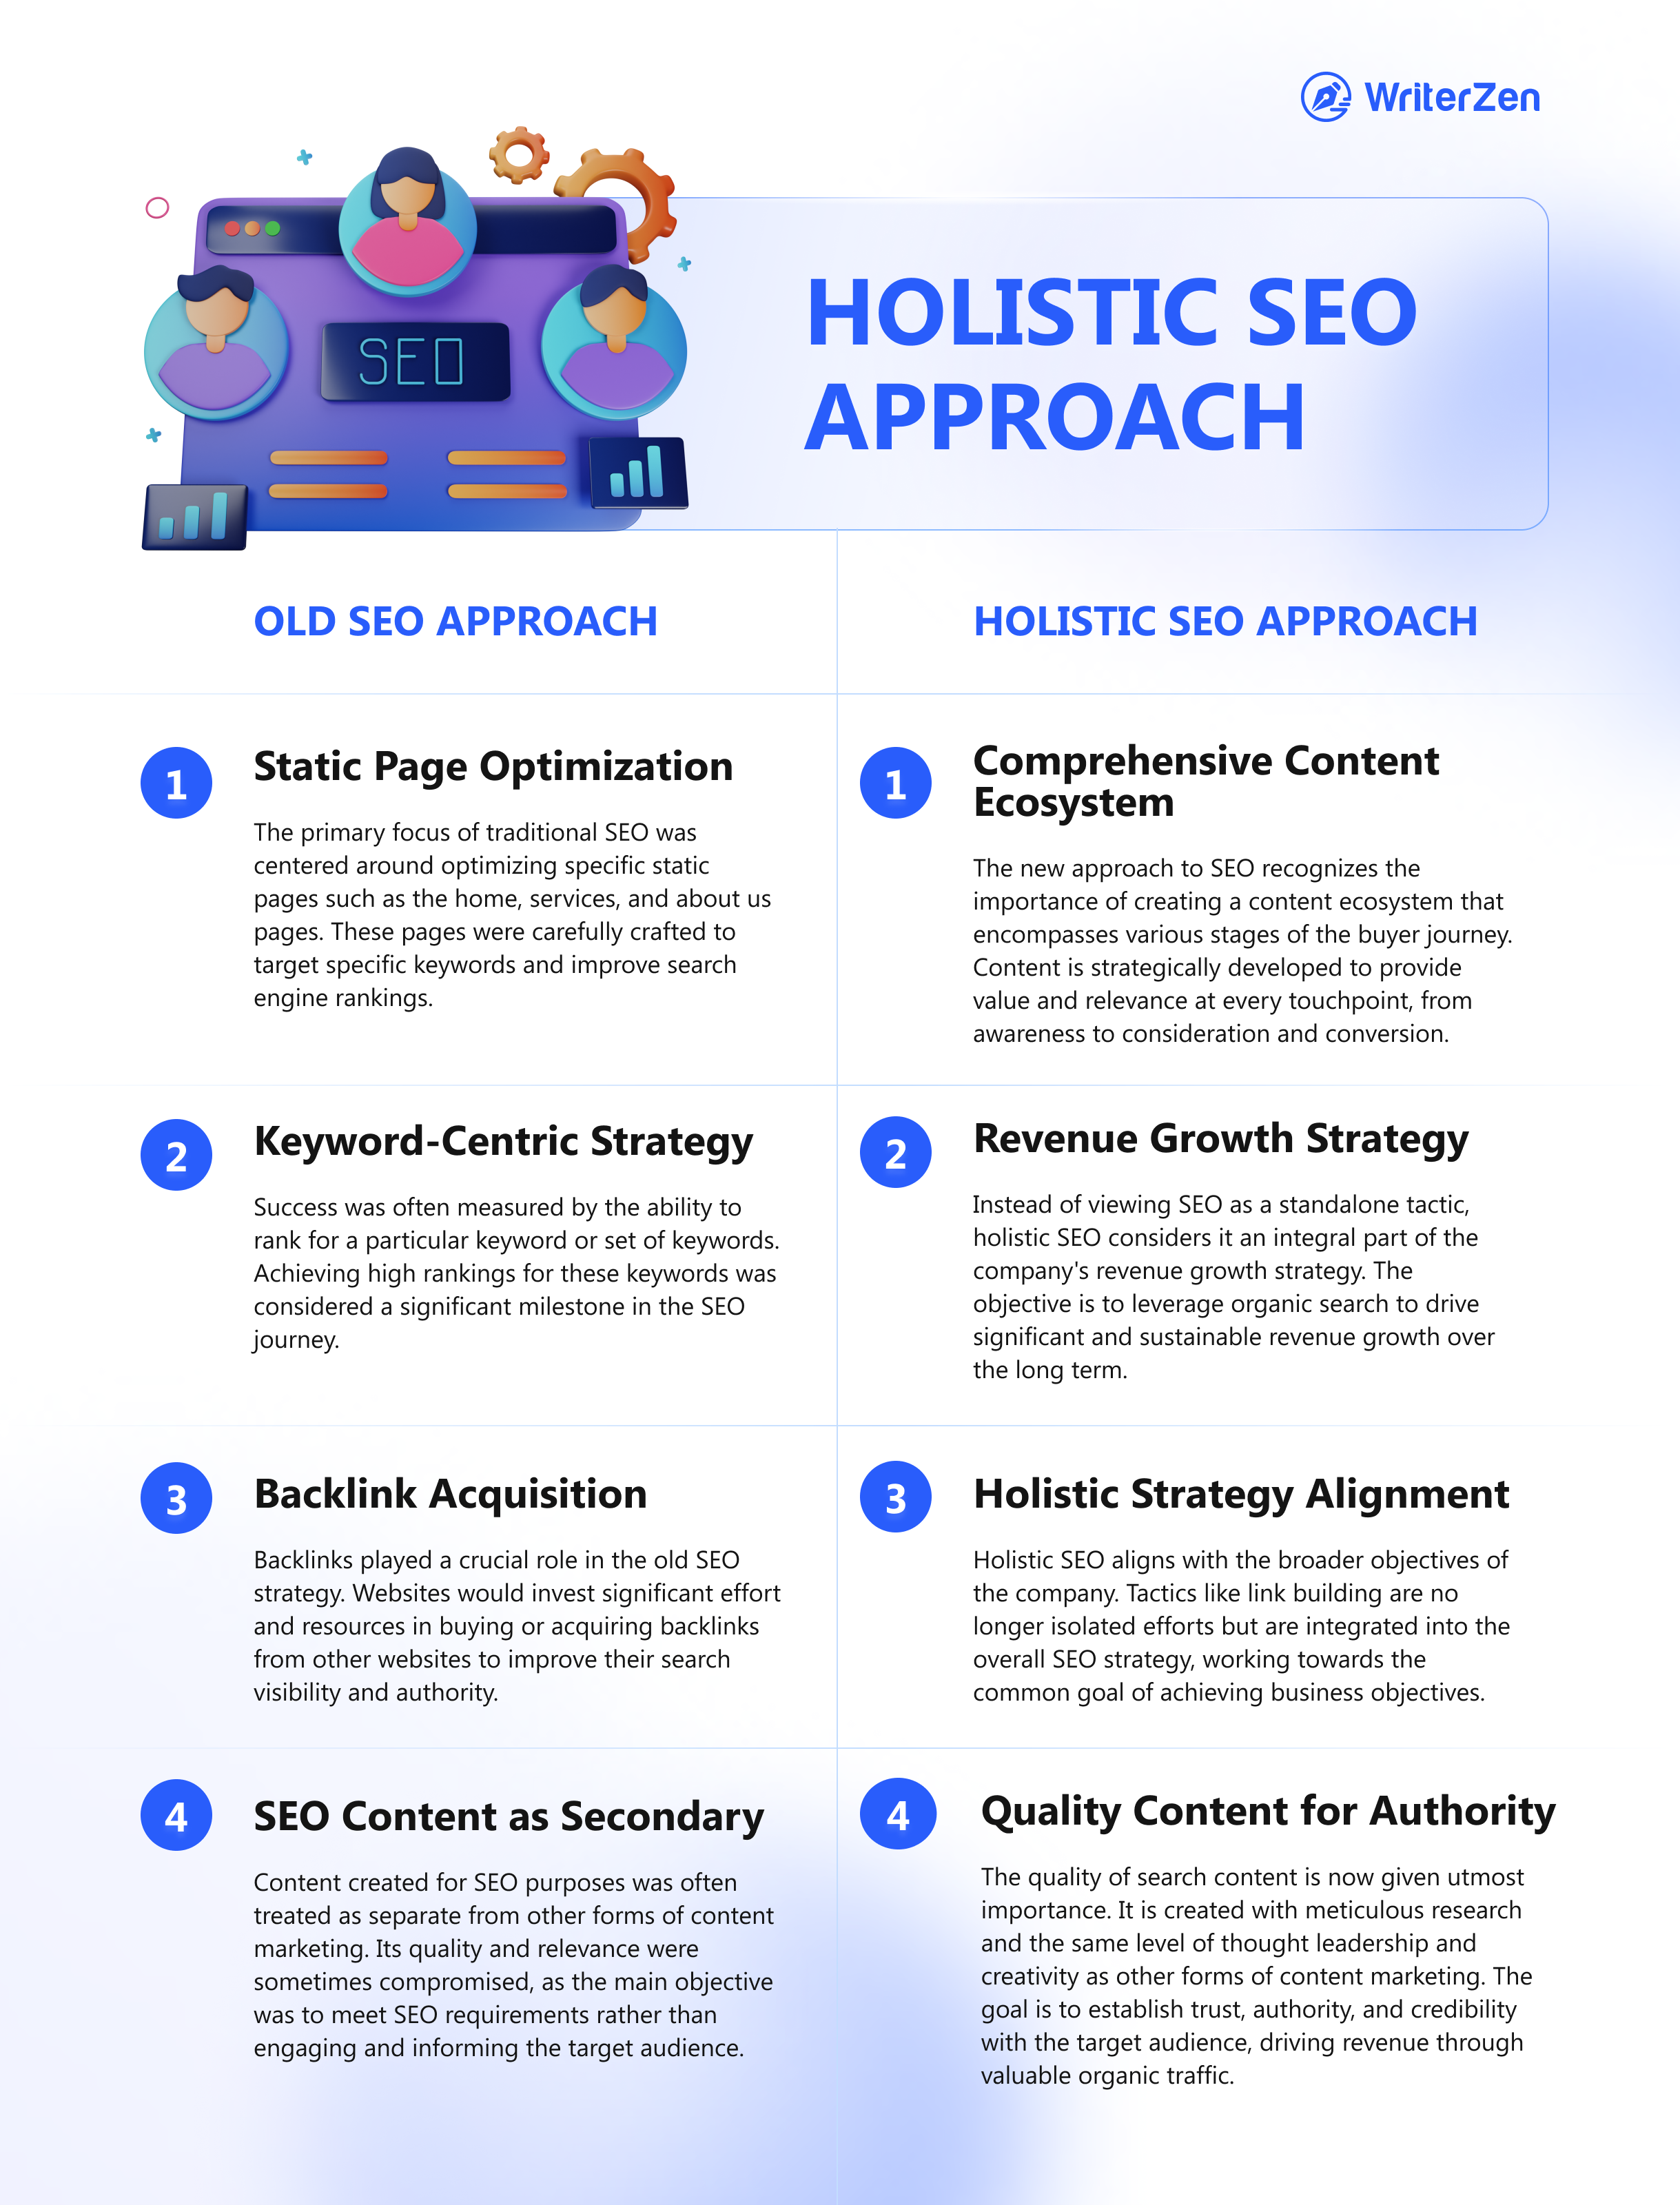 Differences between The Old and Holistic SEO Approaches